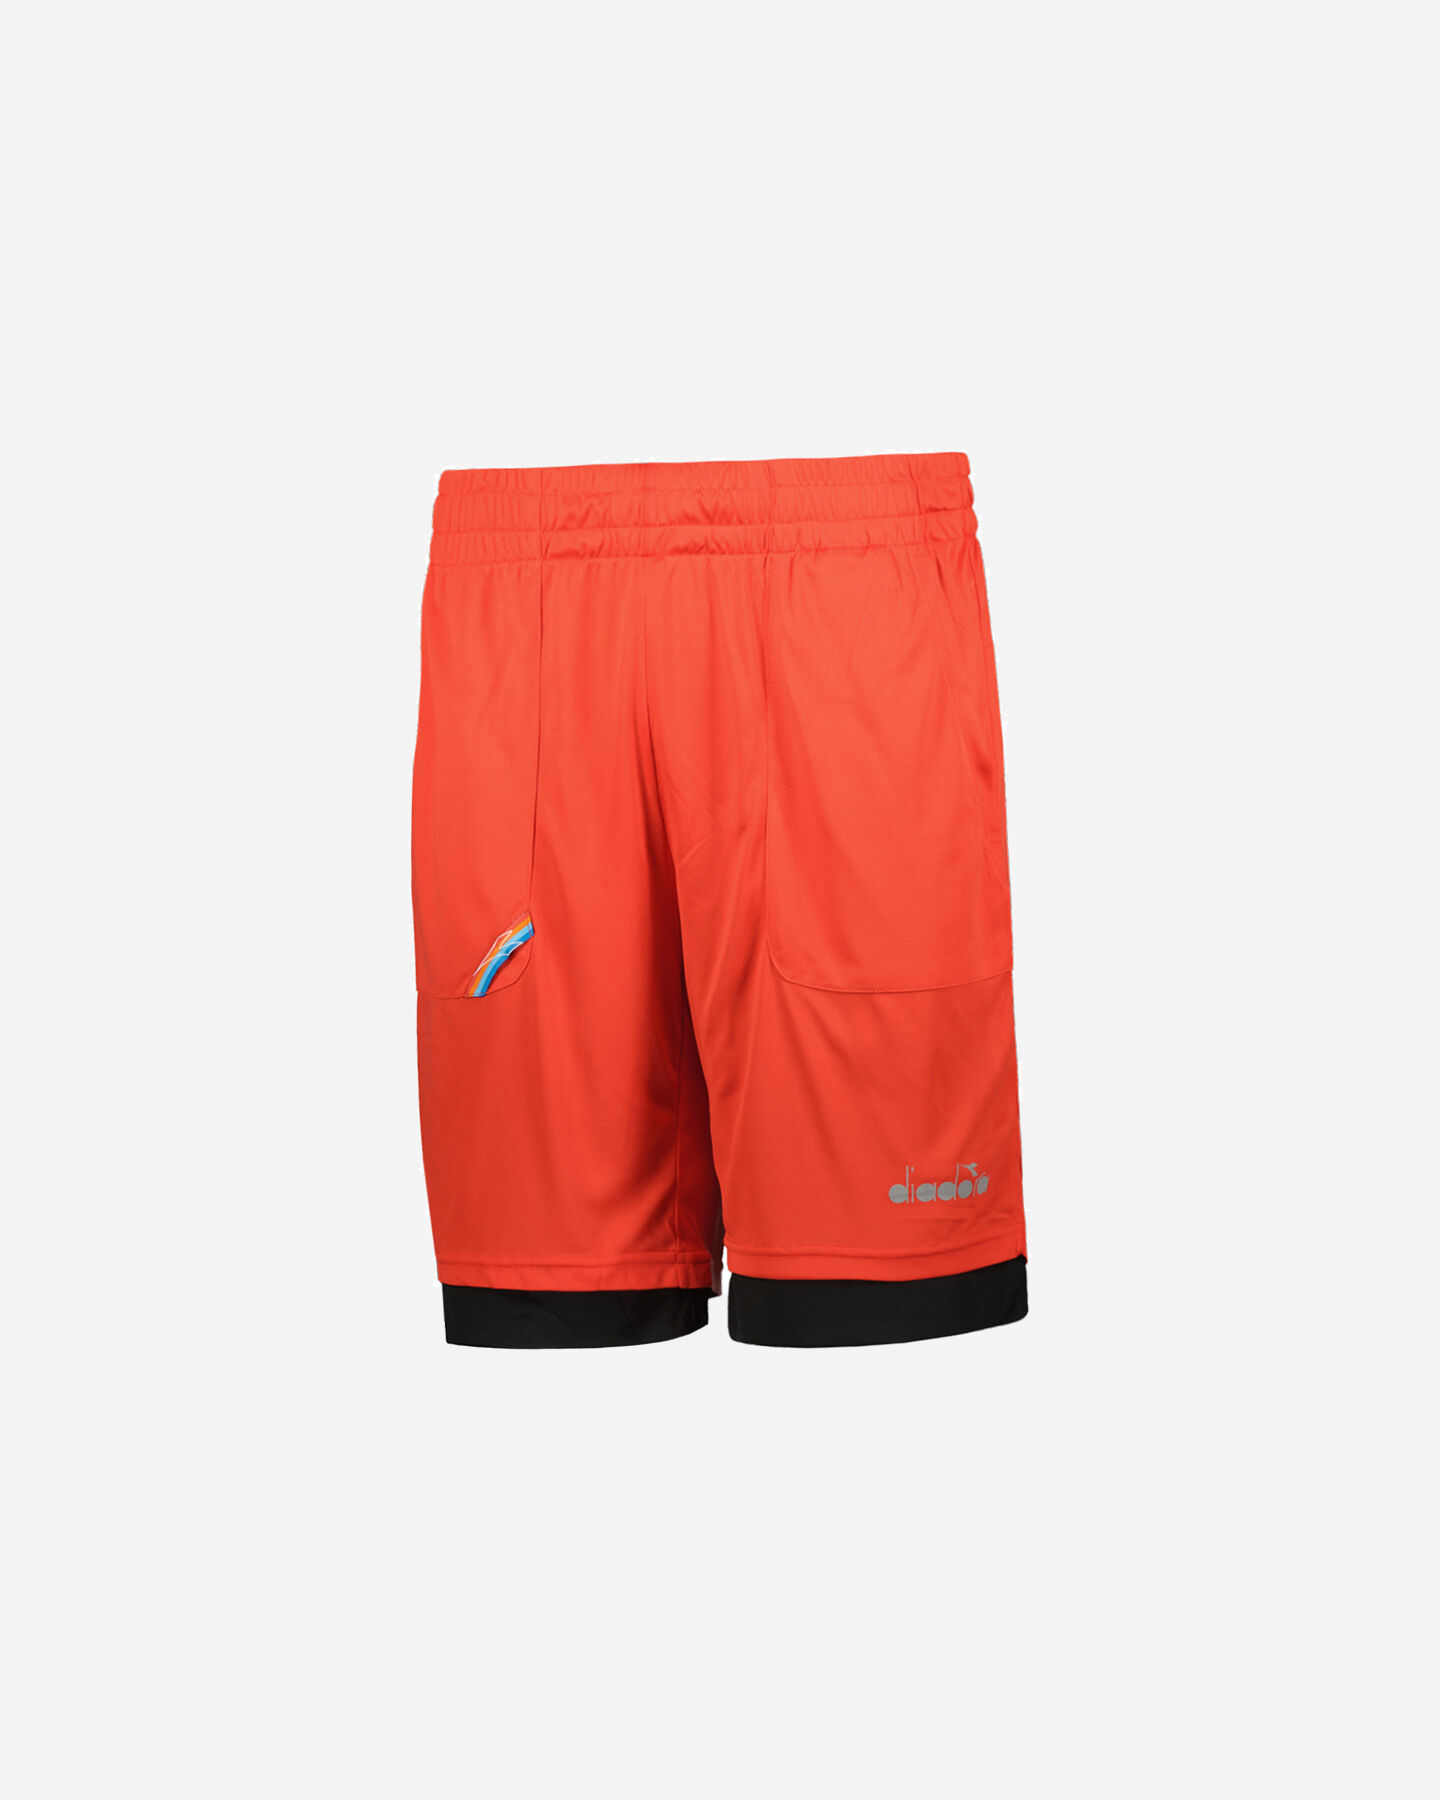  Short running DIADORA BE ONE REVERSIBLE M S5400816|C0809|S scatto 0